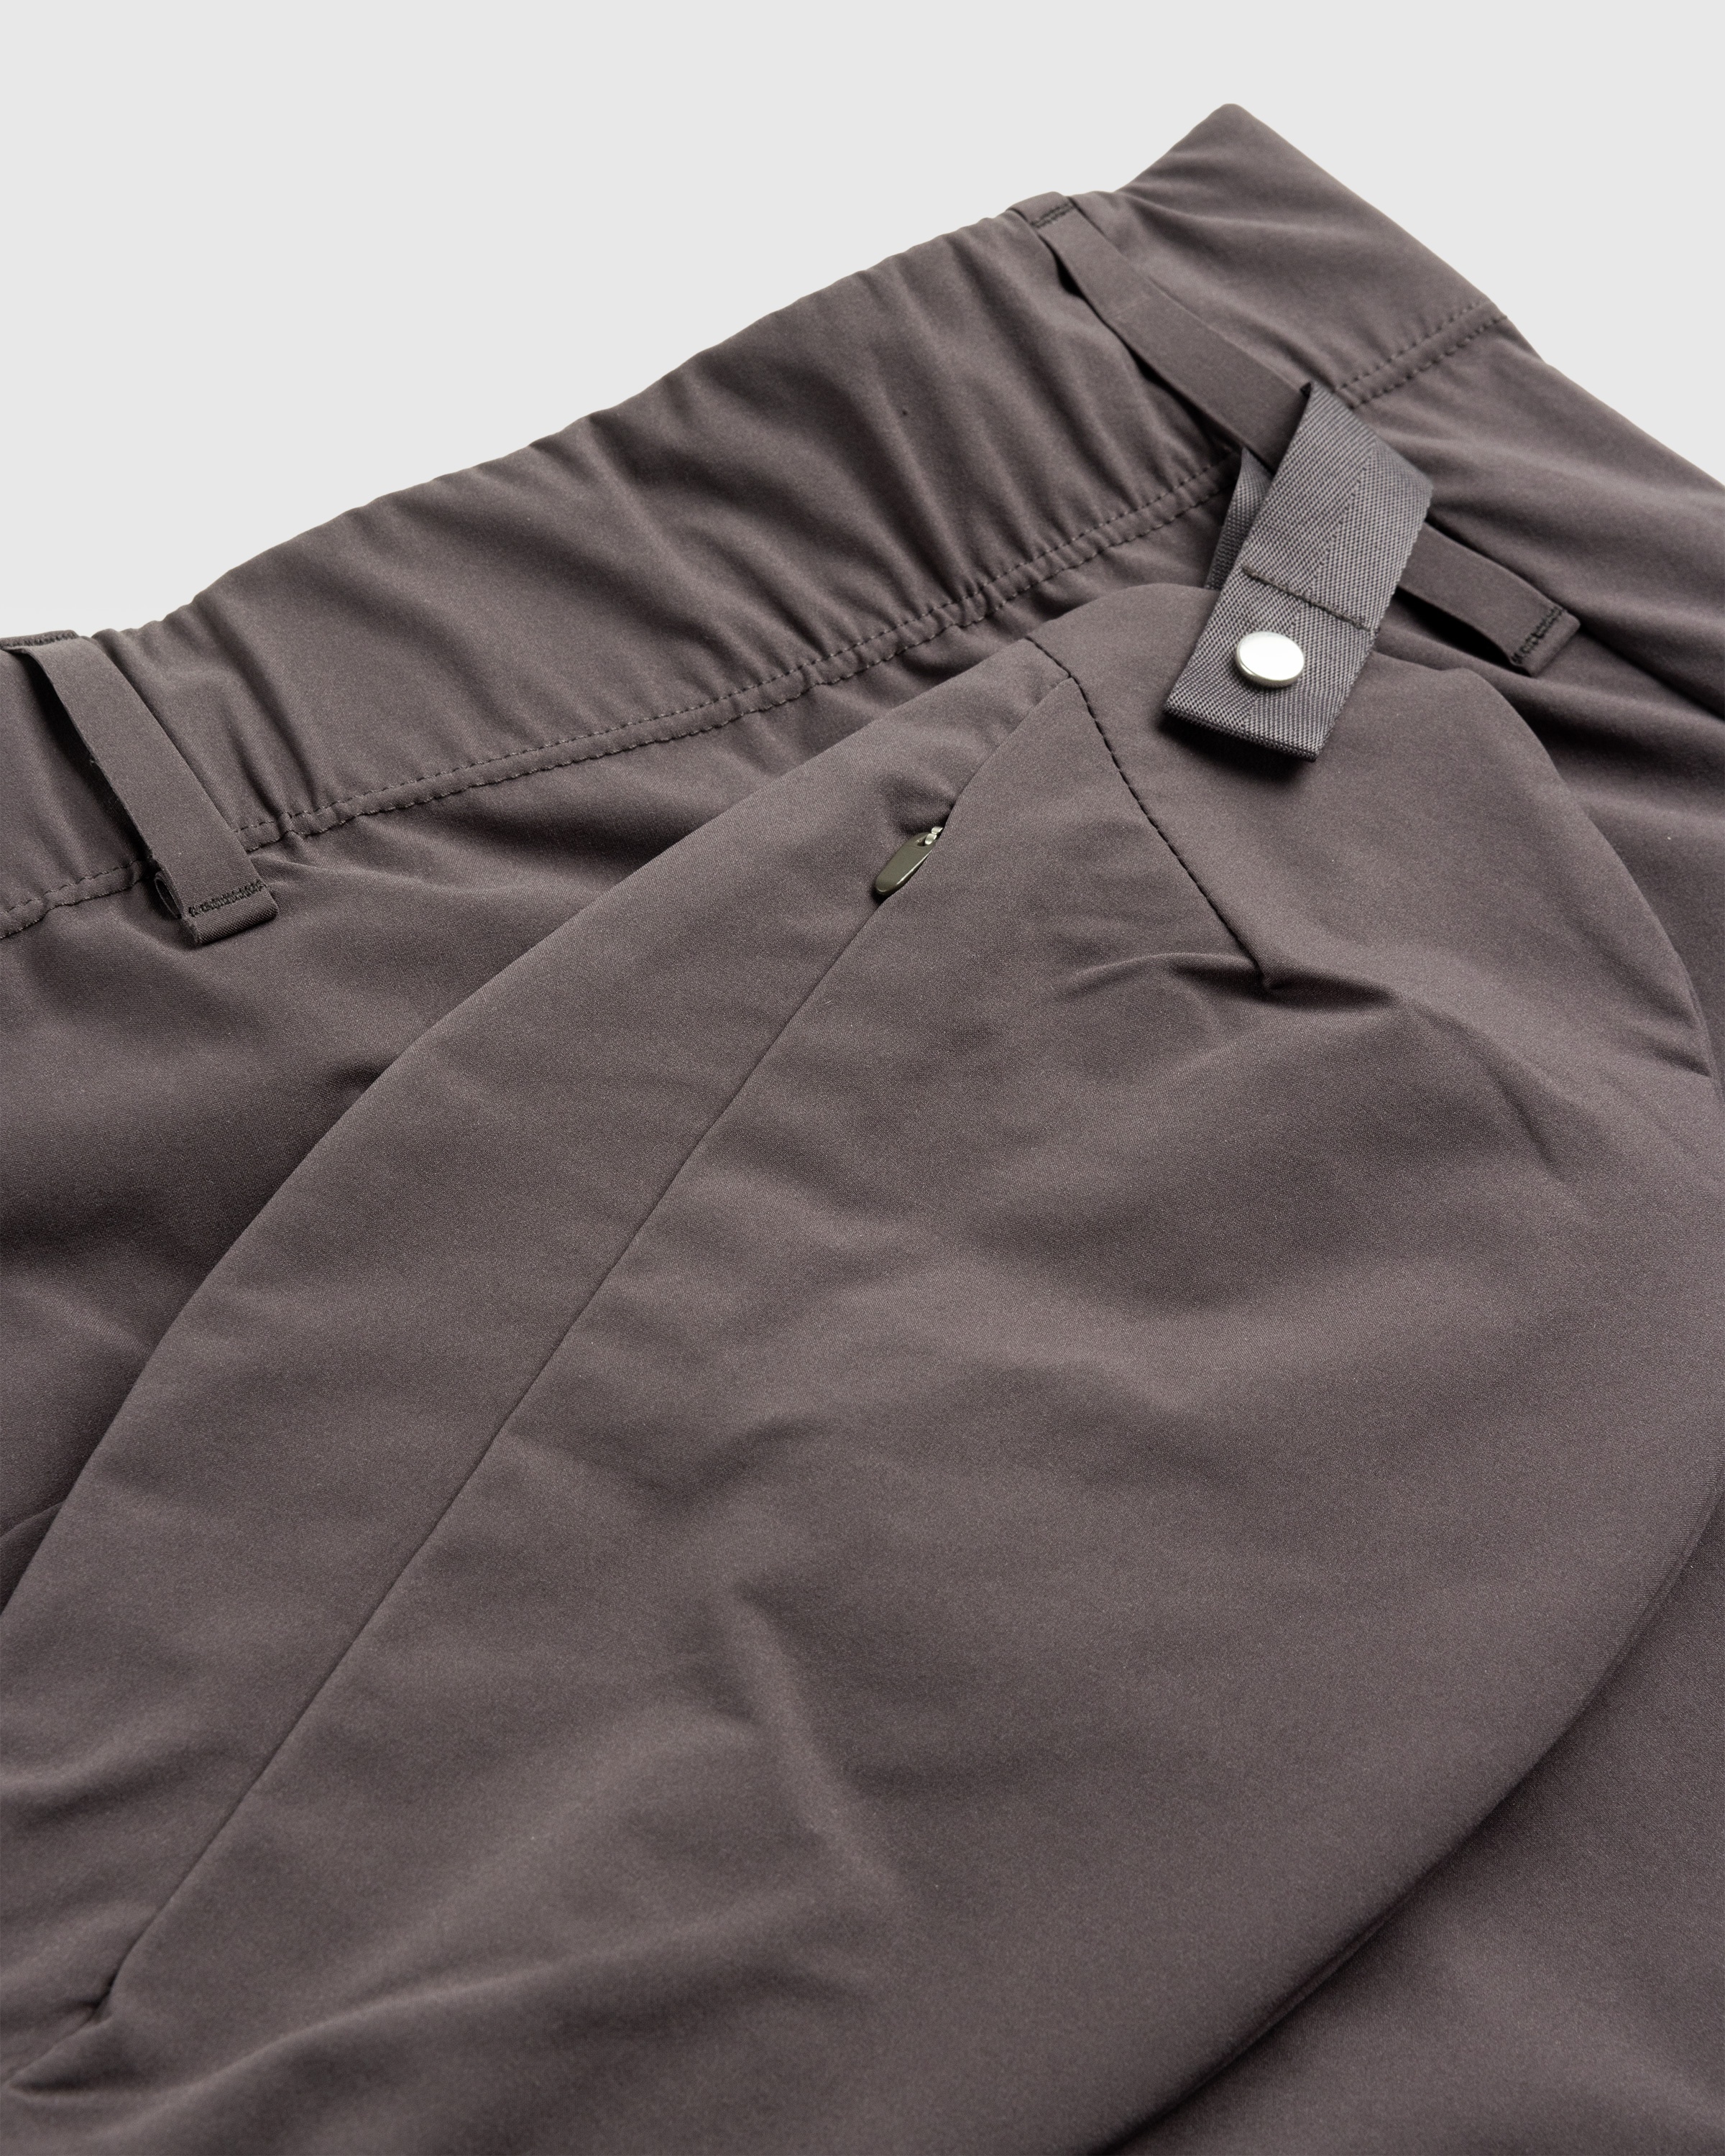 Post Archive Faction (PAF) – 6.0 Technical Pants Right Brown - 8